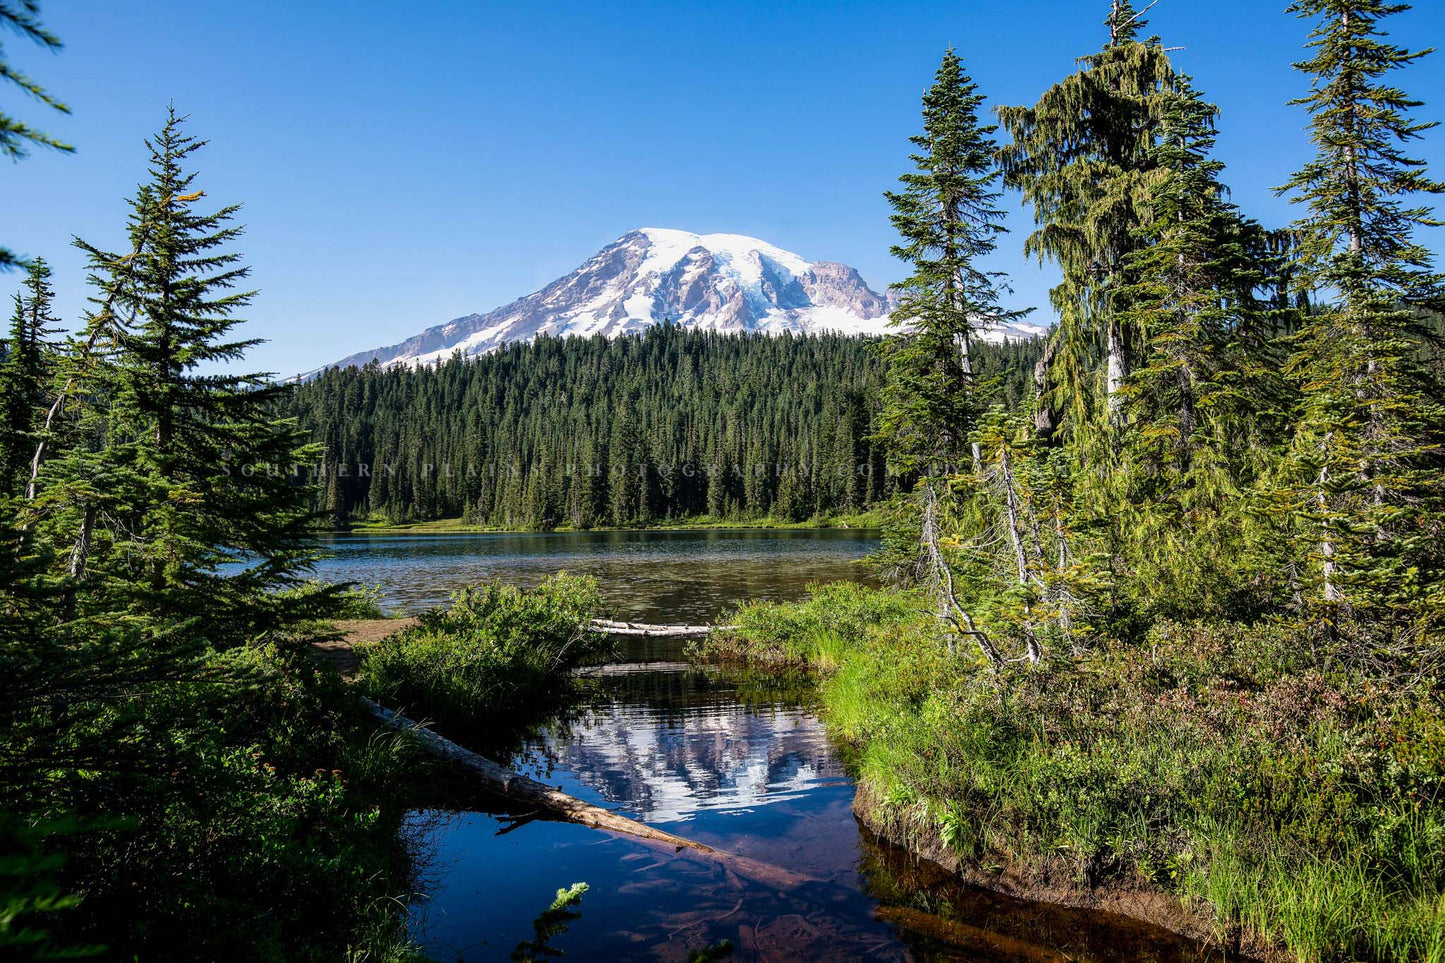 Pacific Northwest photography print of Mount Rainier framed between pine trees on a summer day at Reflection Lake in Washington state by Sean Ramsey of Southern Plains Photography.